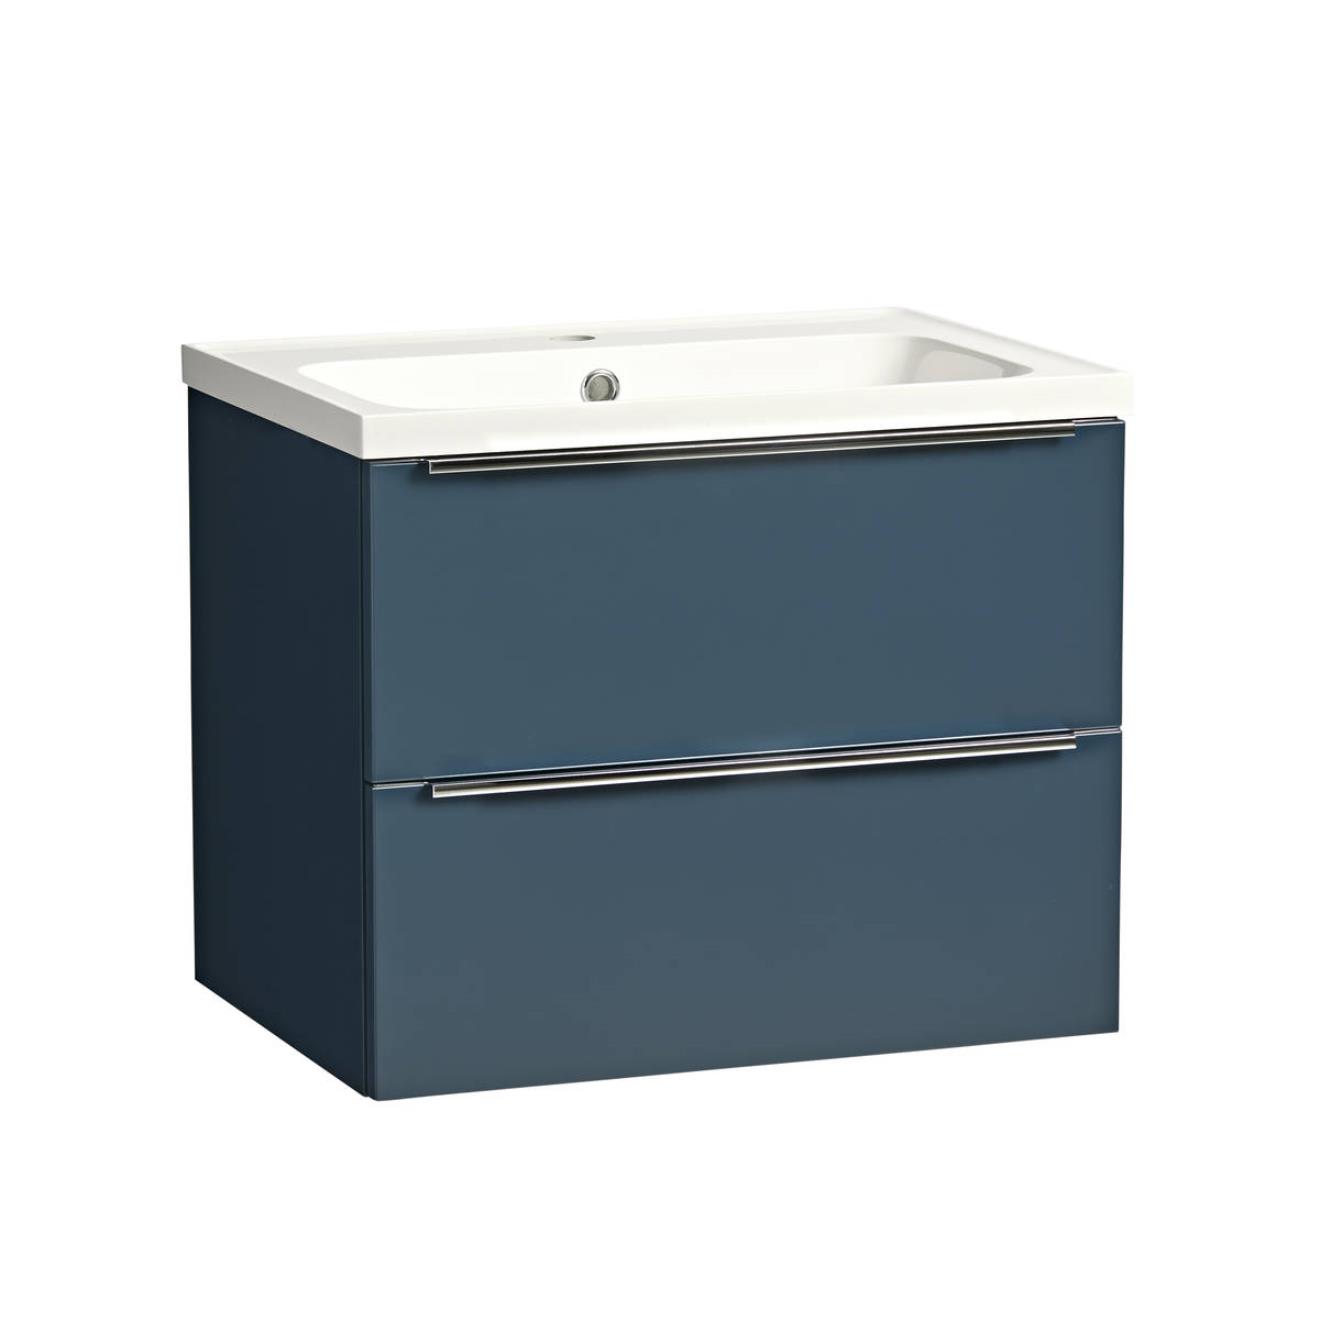 Cadence Wall Hung Vanity Unit & Isocast Basin Oxford Blue 600mm